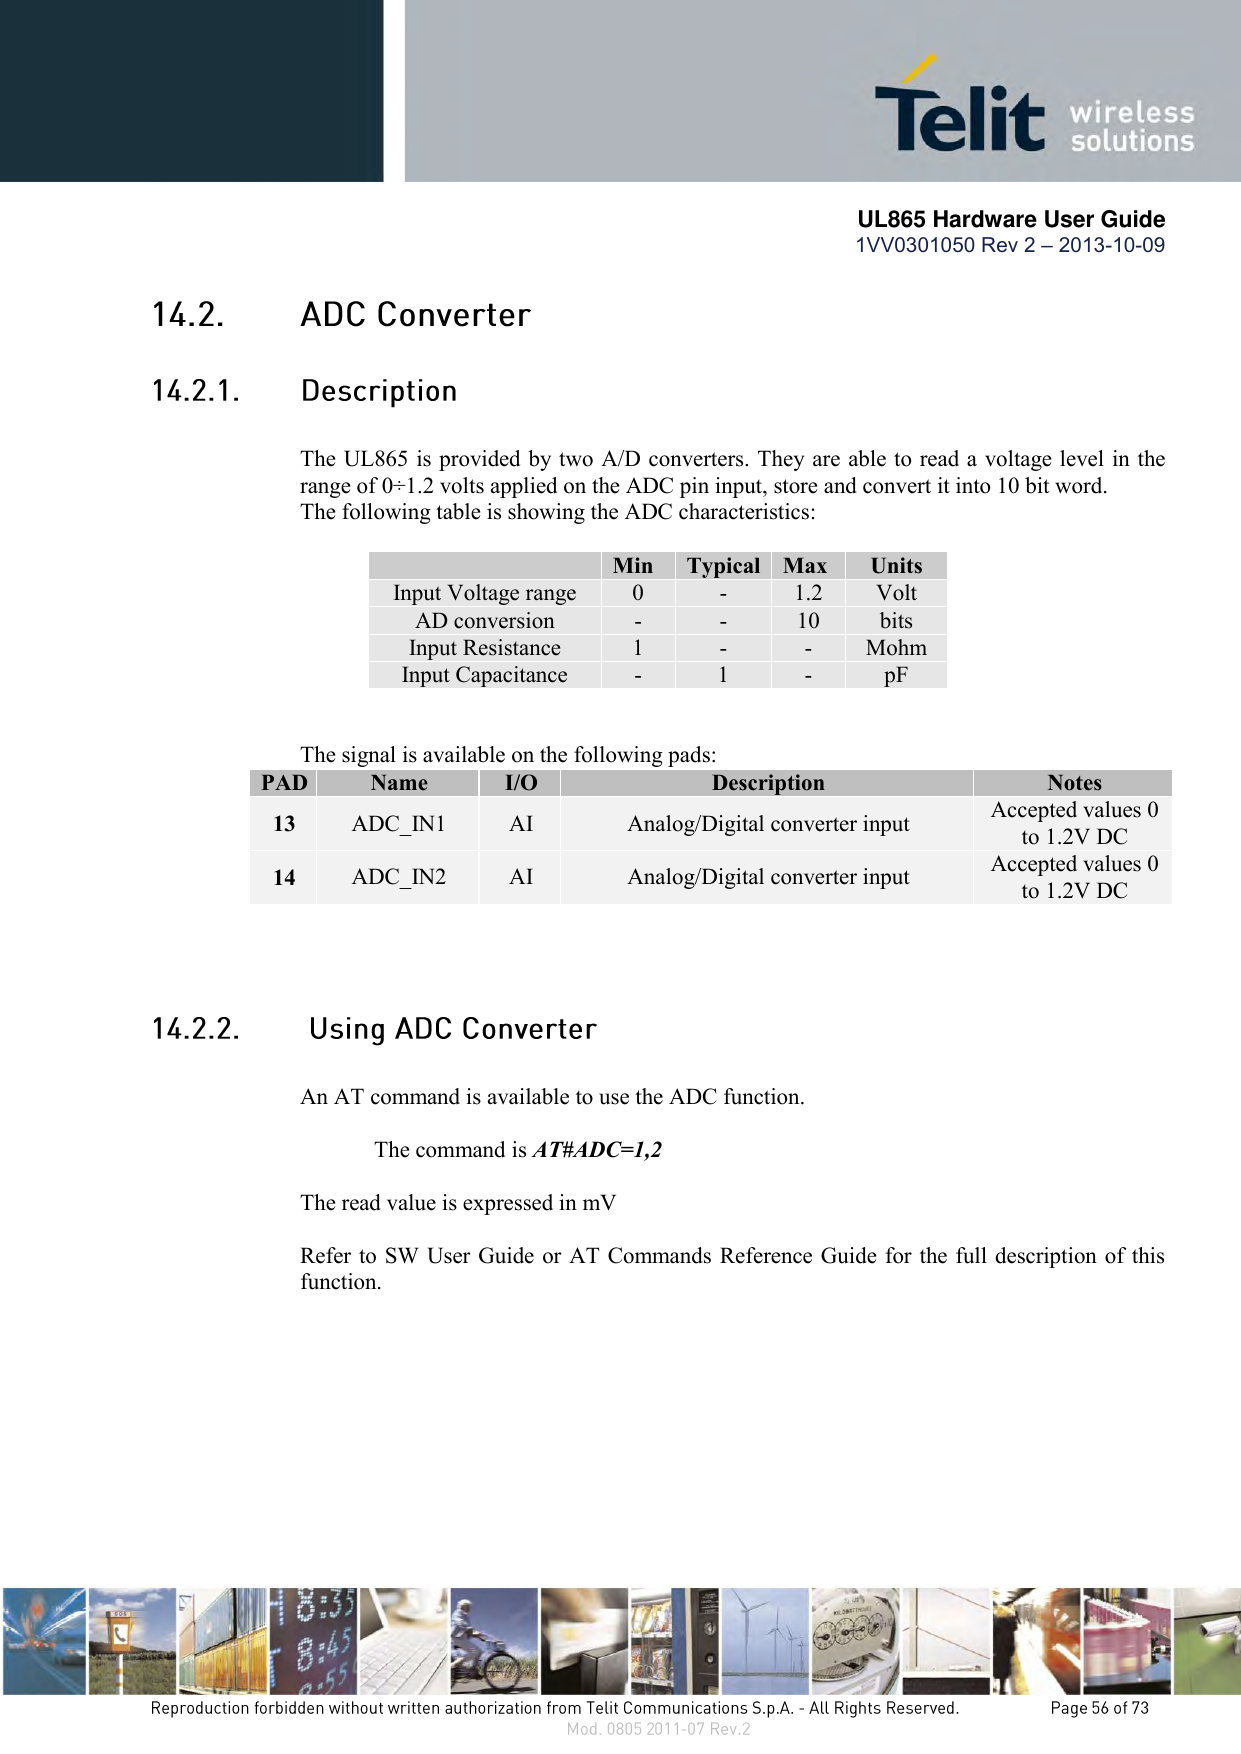       UL865 Hardware User Guide 1VV0301050 Rev 2 – 2013-10-09      The UL865 is provided by two A/D converters. They are able to read a voltage level in the range of 0÷1.2 volts applied on the ADC pin input, store and convert it into 10 bit word.  The following table is showing the ADC characteristics:   Min Typical Max Units Input Voltage range 0 - 1.2 Volt AD conversion - - 10 bits Input Resistance 1 - - Mohm Input Capacitance  - 1 - pF   The signal is available on the following pads: PAD Name I/O Description Notes 13 ADC_IN1 AI Analog/Digital converter input Accepted values 0 to 1.2V DC 14 ADC_IN2 AI Analog/Digital converter input Accepted values 0 to 1.2V DC      An AT command is available to use the ADC function.  The command is AT#ADC=1,2  The read value is expressed in mV  Refer to SW User Guide or AT Commands Reference Guide for the full description of this function.  